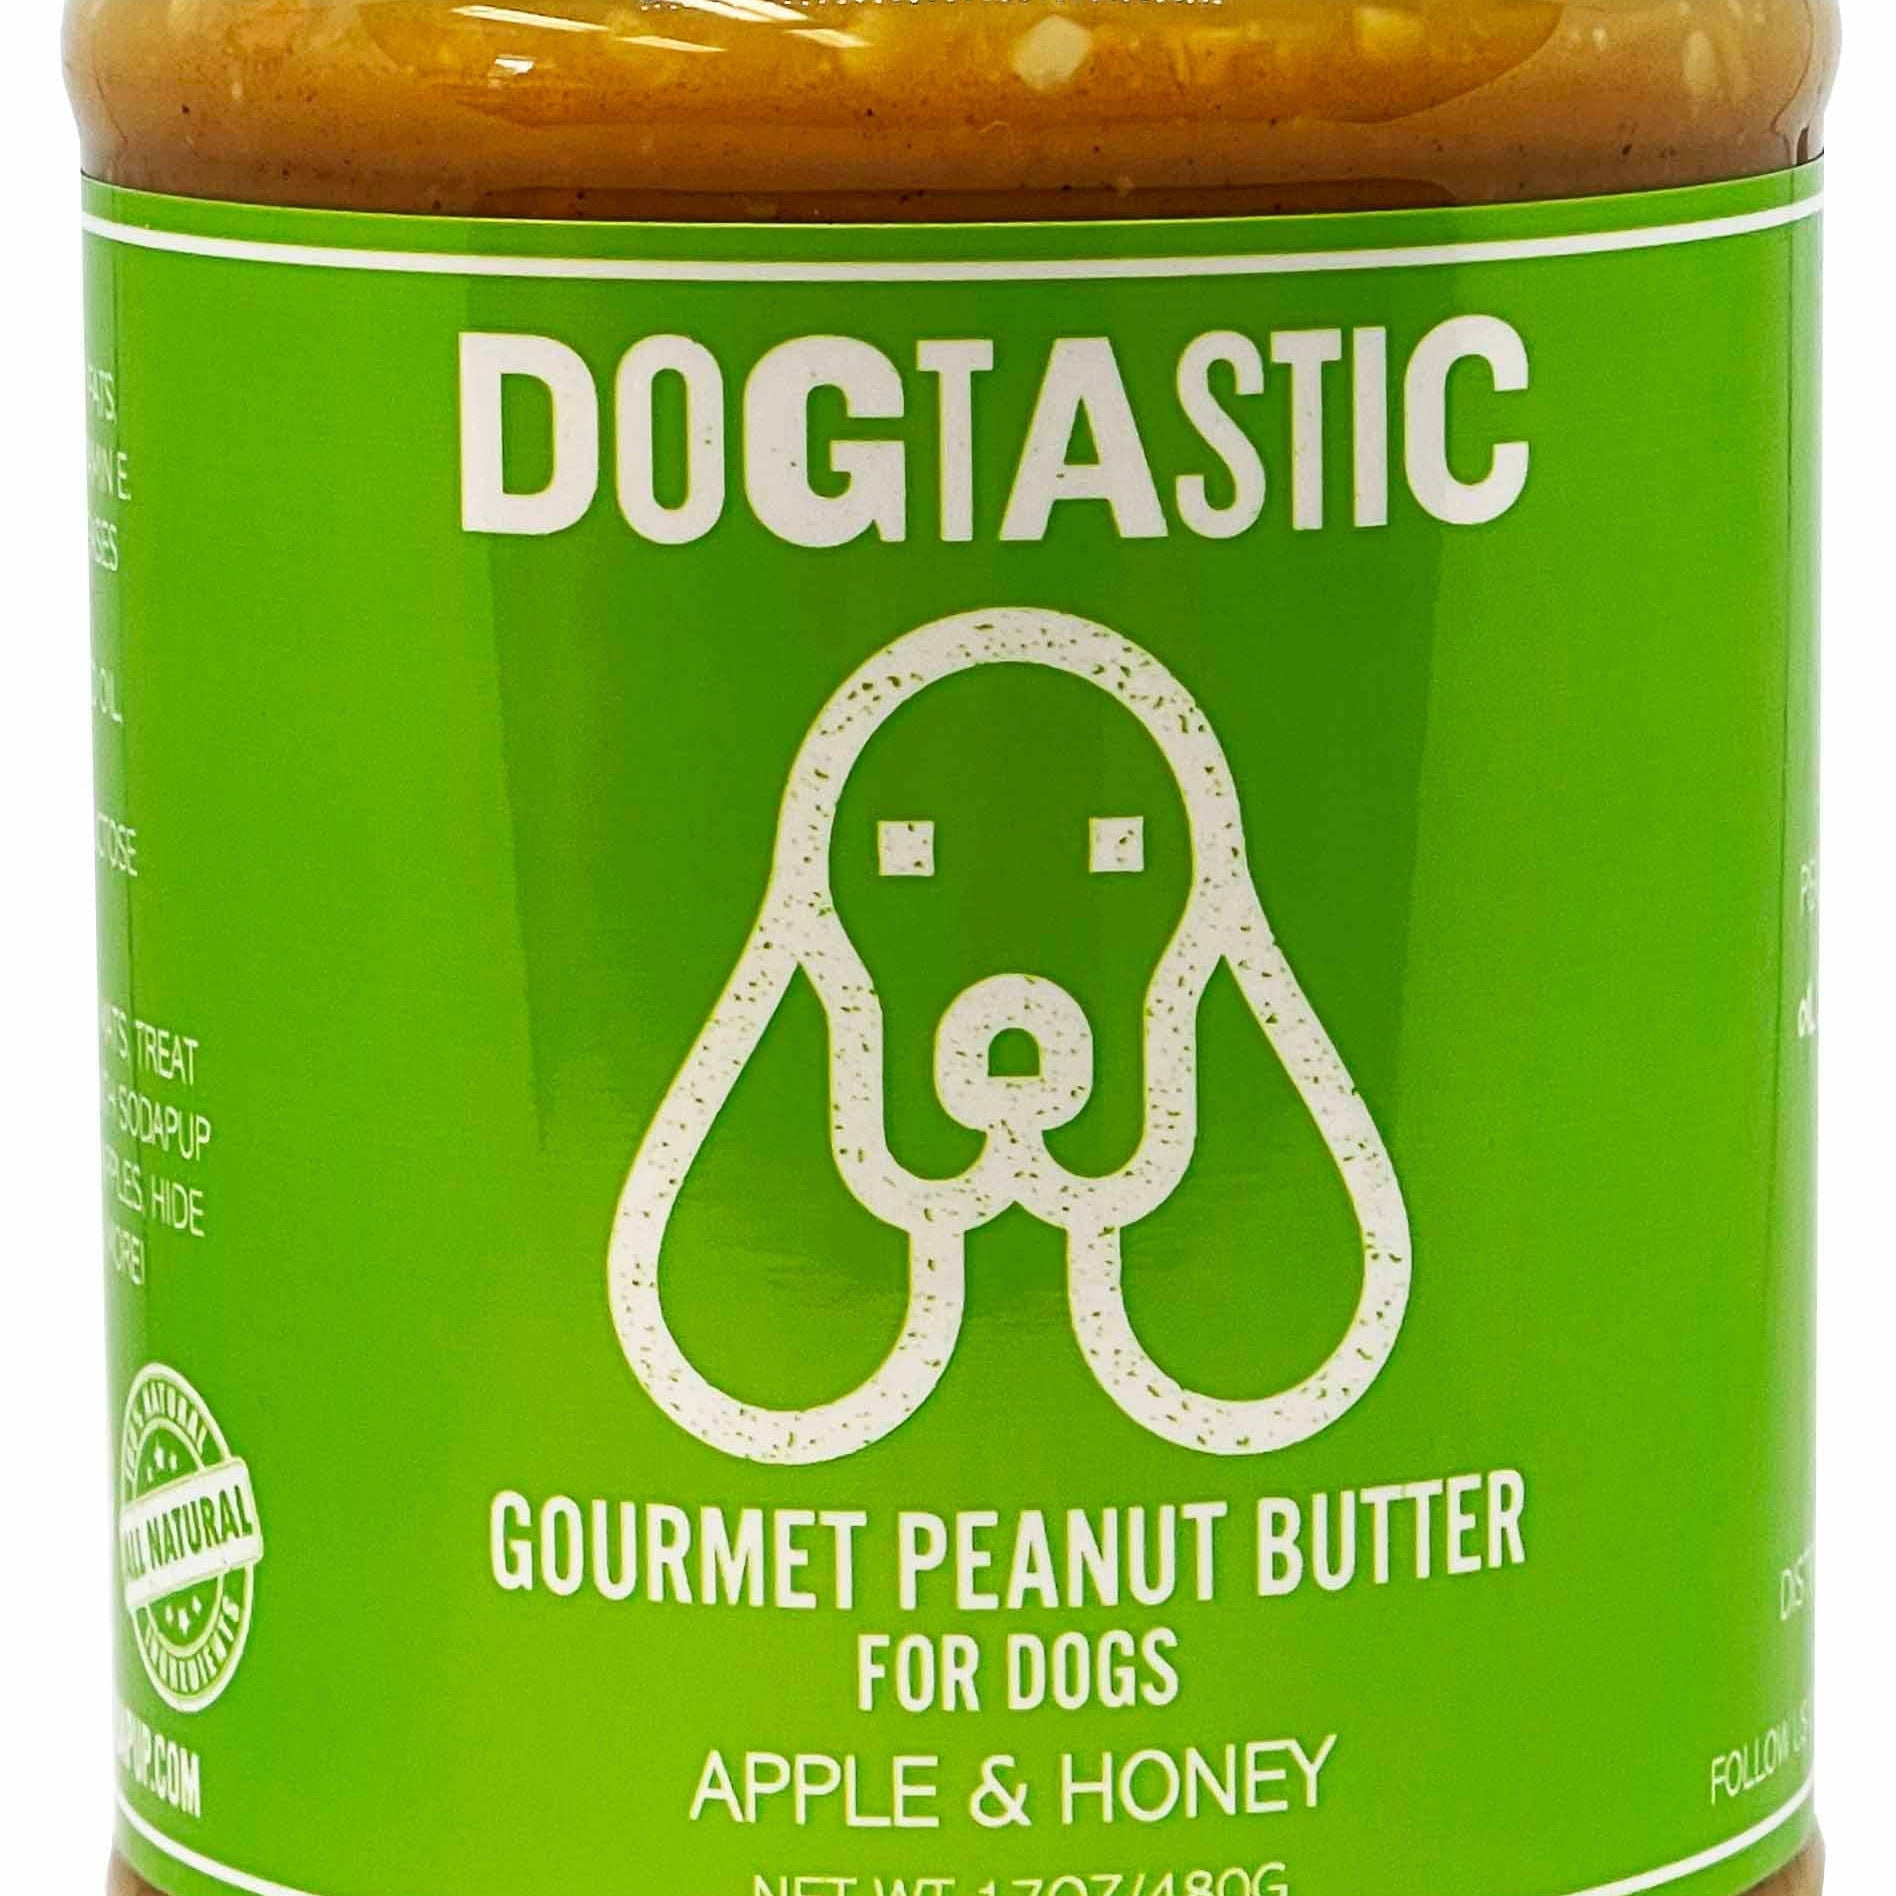 Dogtastic Gourmet Peanut Butter for Dogs - Apple & Honey Flavor - Rocky & Maggie's Pet Boutique and Salon